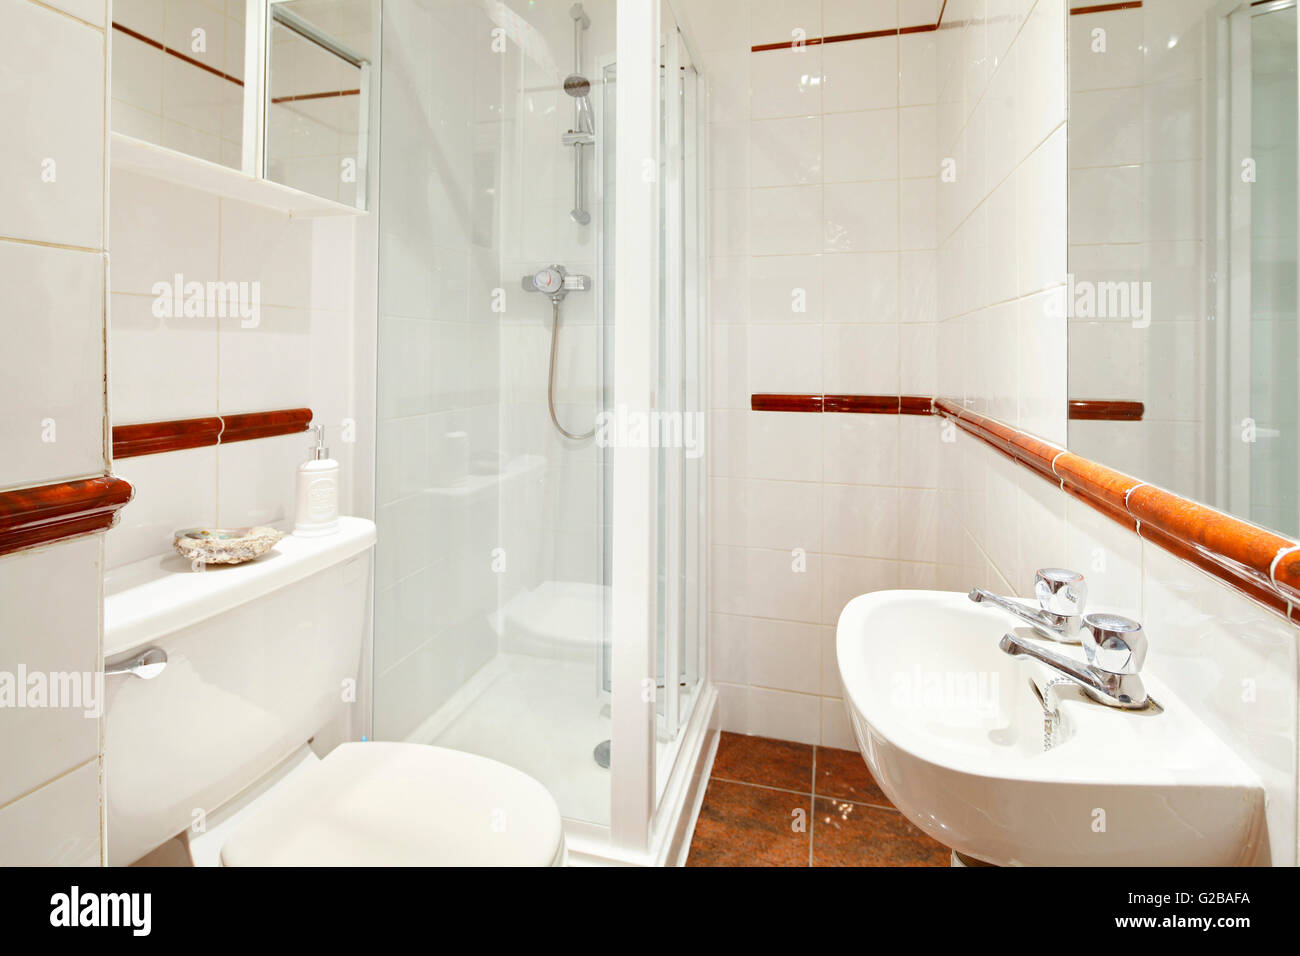 Harrington Gardens. Small modern bathroom with white features and shower cubicle. Stock Photo